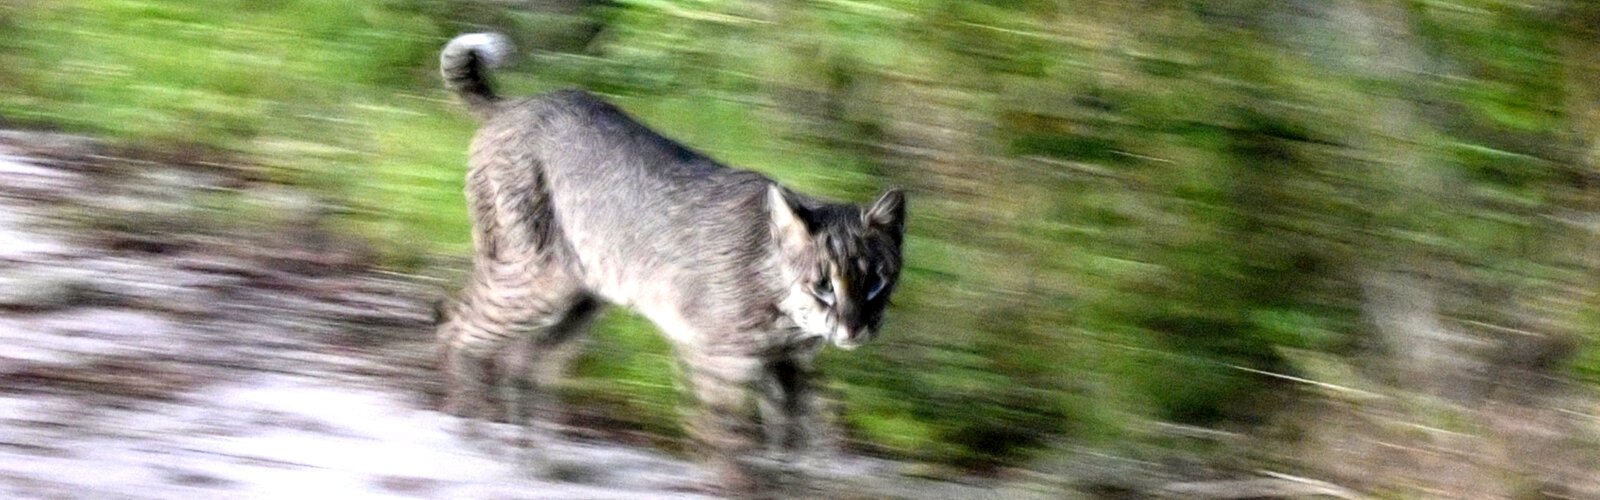 A resident bobcat on the hunt passes furtively on the side of Alligator Alley in the early morning hours.